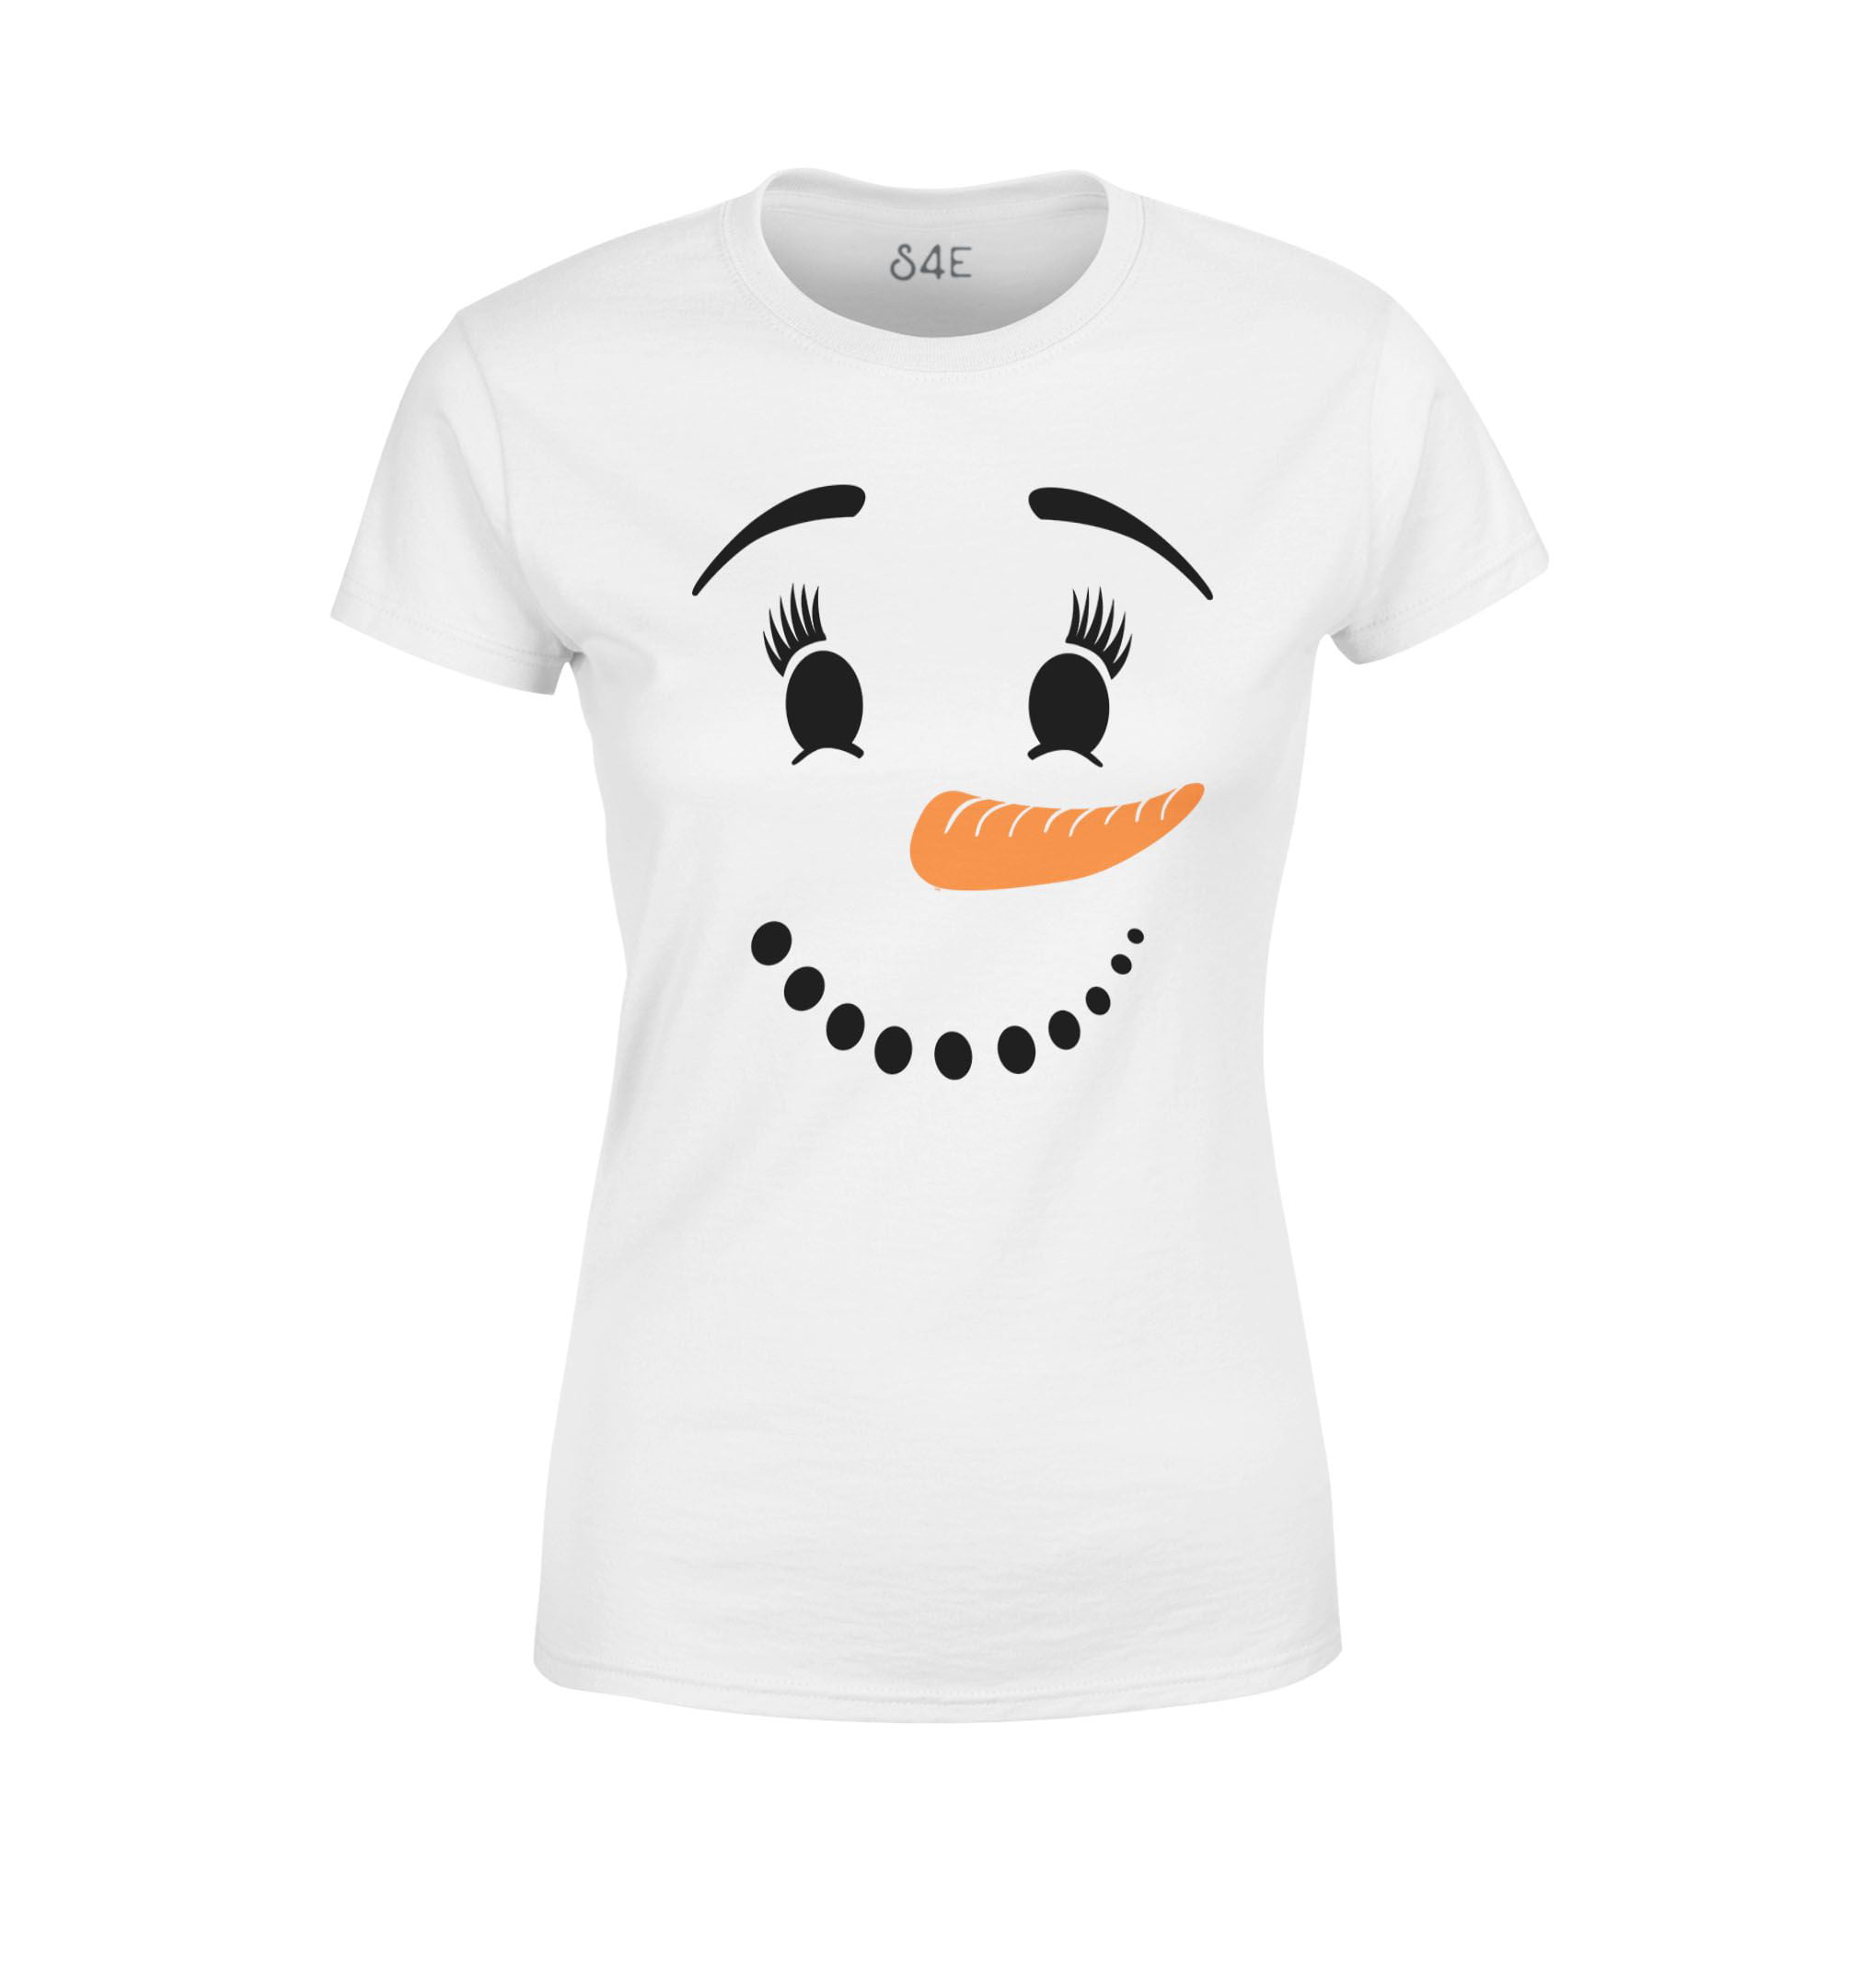 S4E Snowman Girl Face with Eyelashes Costume Hoodie Sweatshirts 